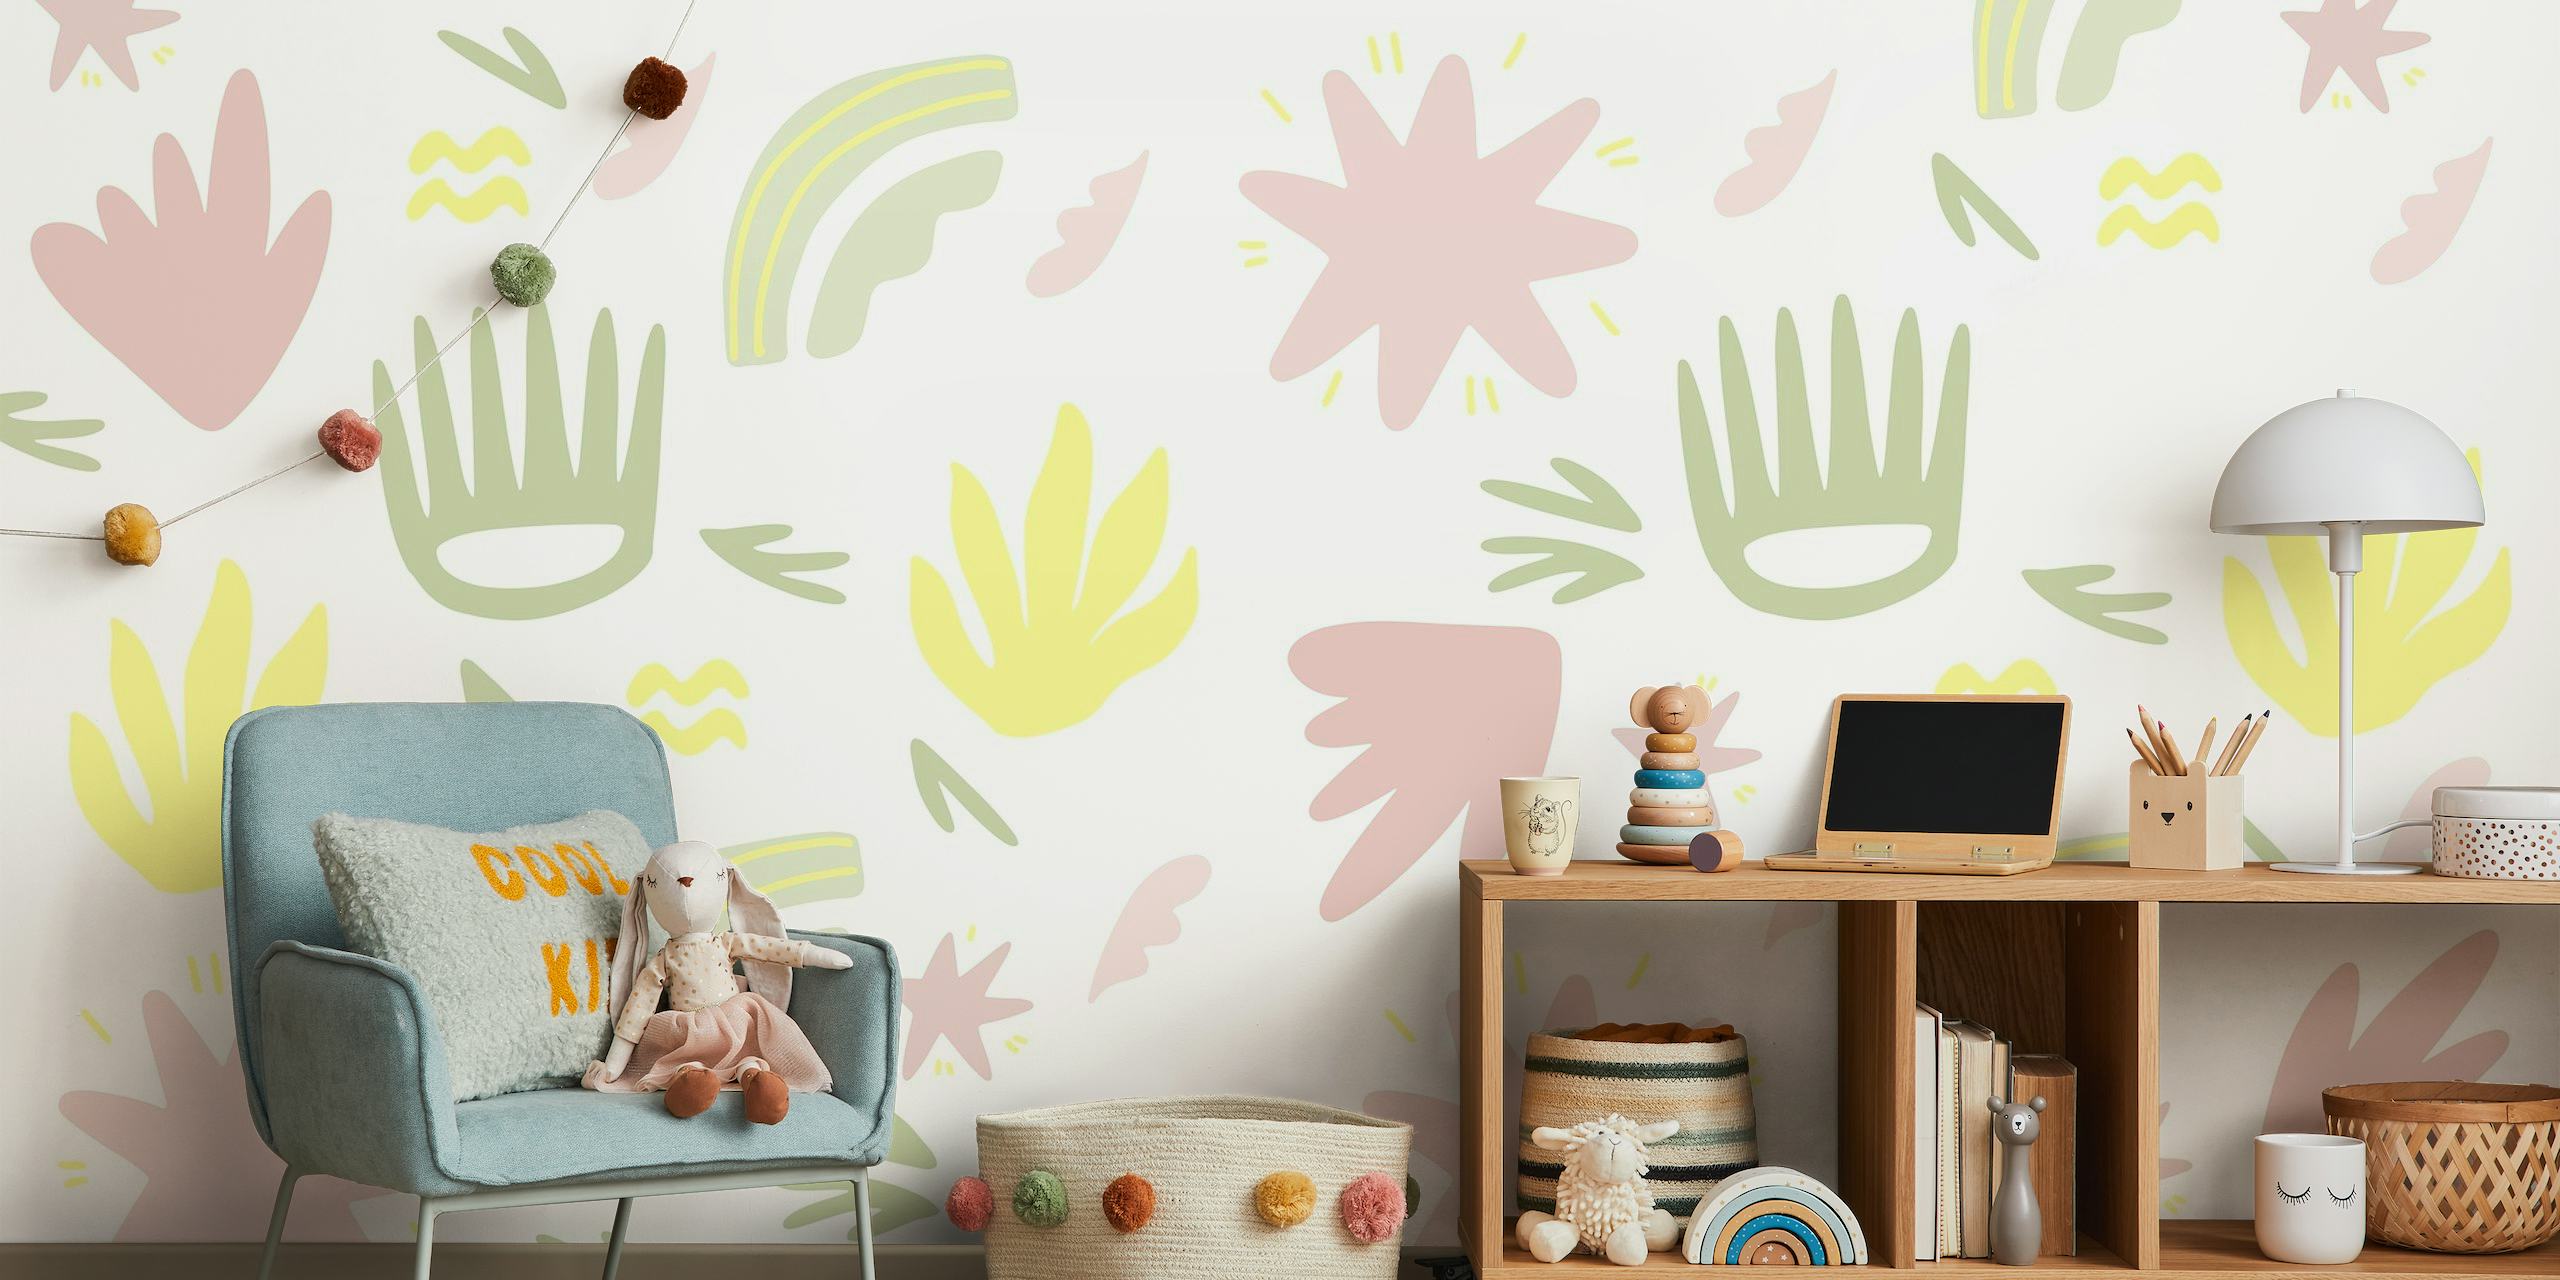 Hand-drawn style wall mural with pastel yellow, pink, and green botanical elements